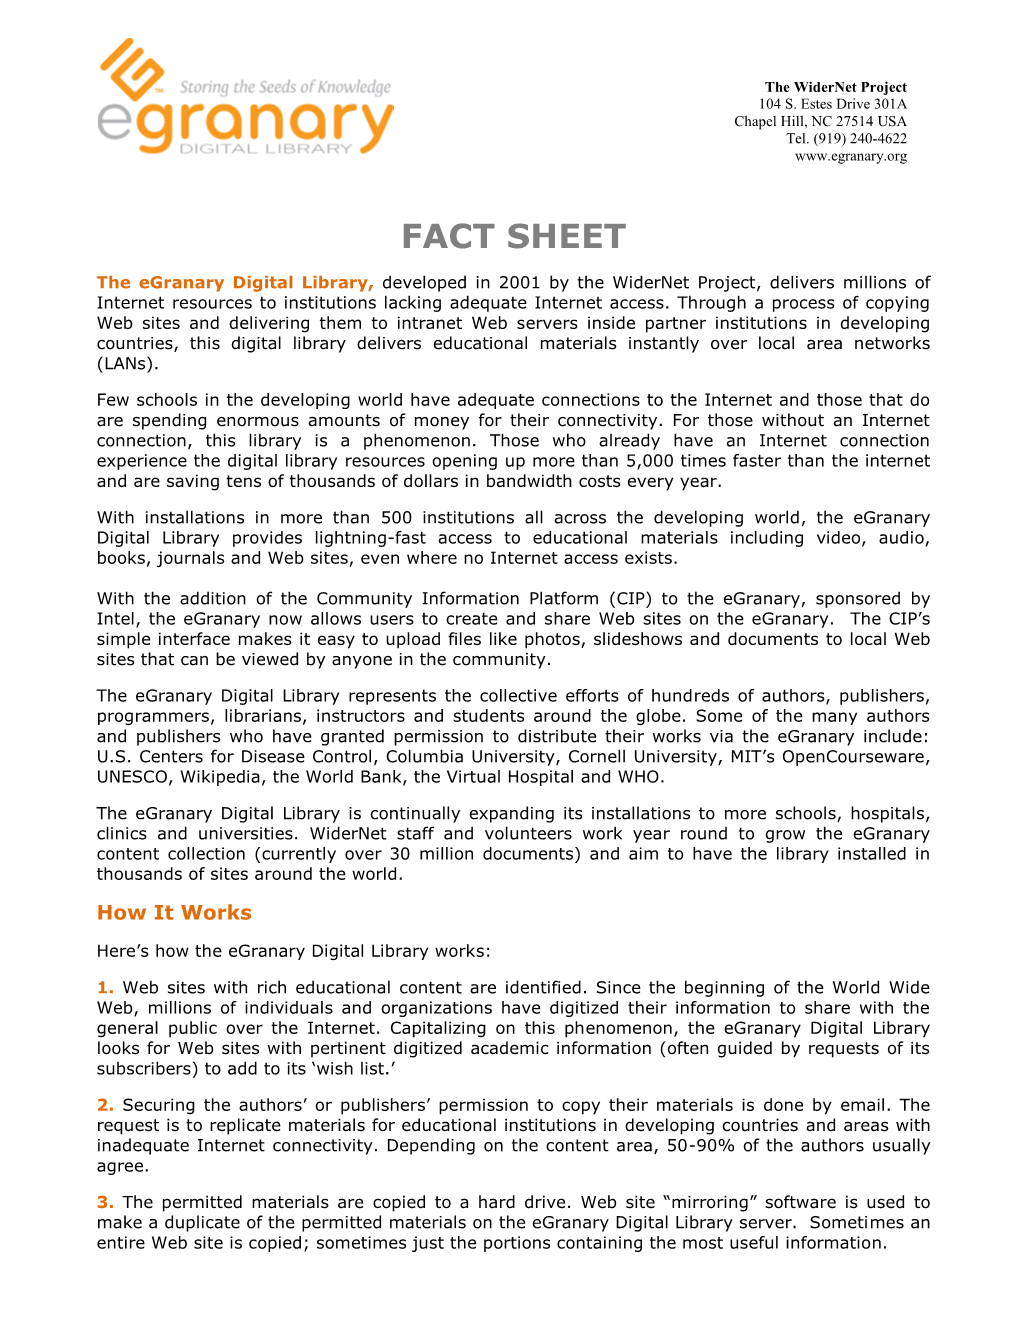 Download the Egranary Digital Library Fact Sheet